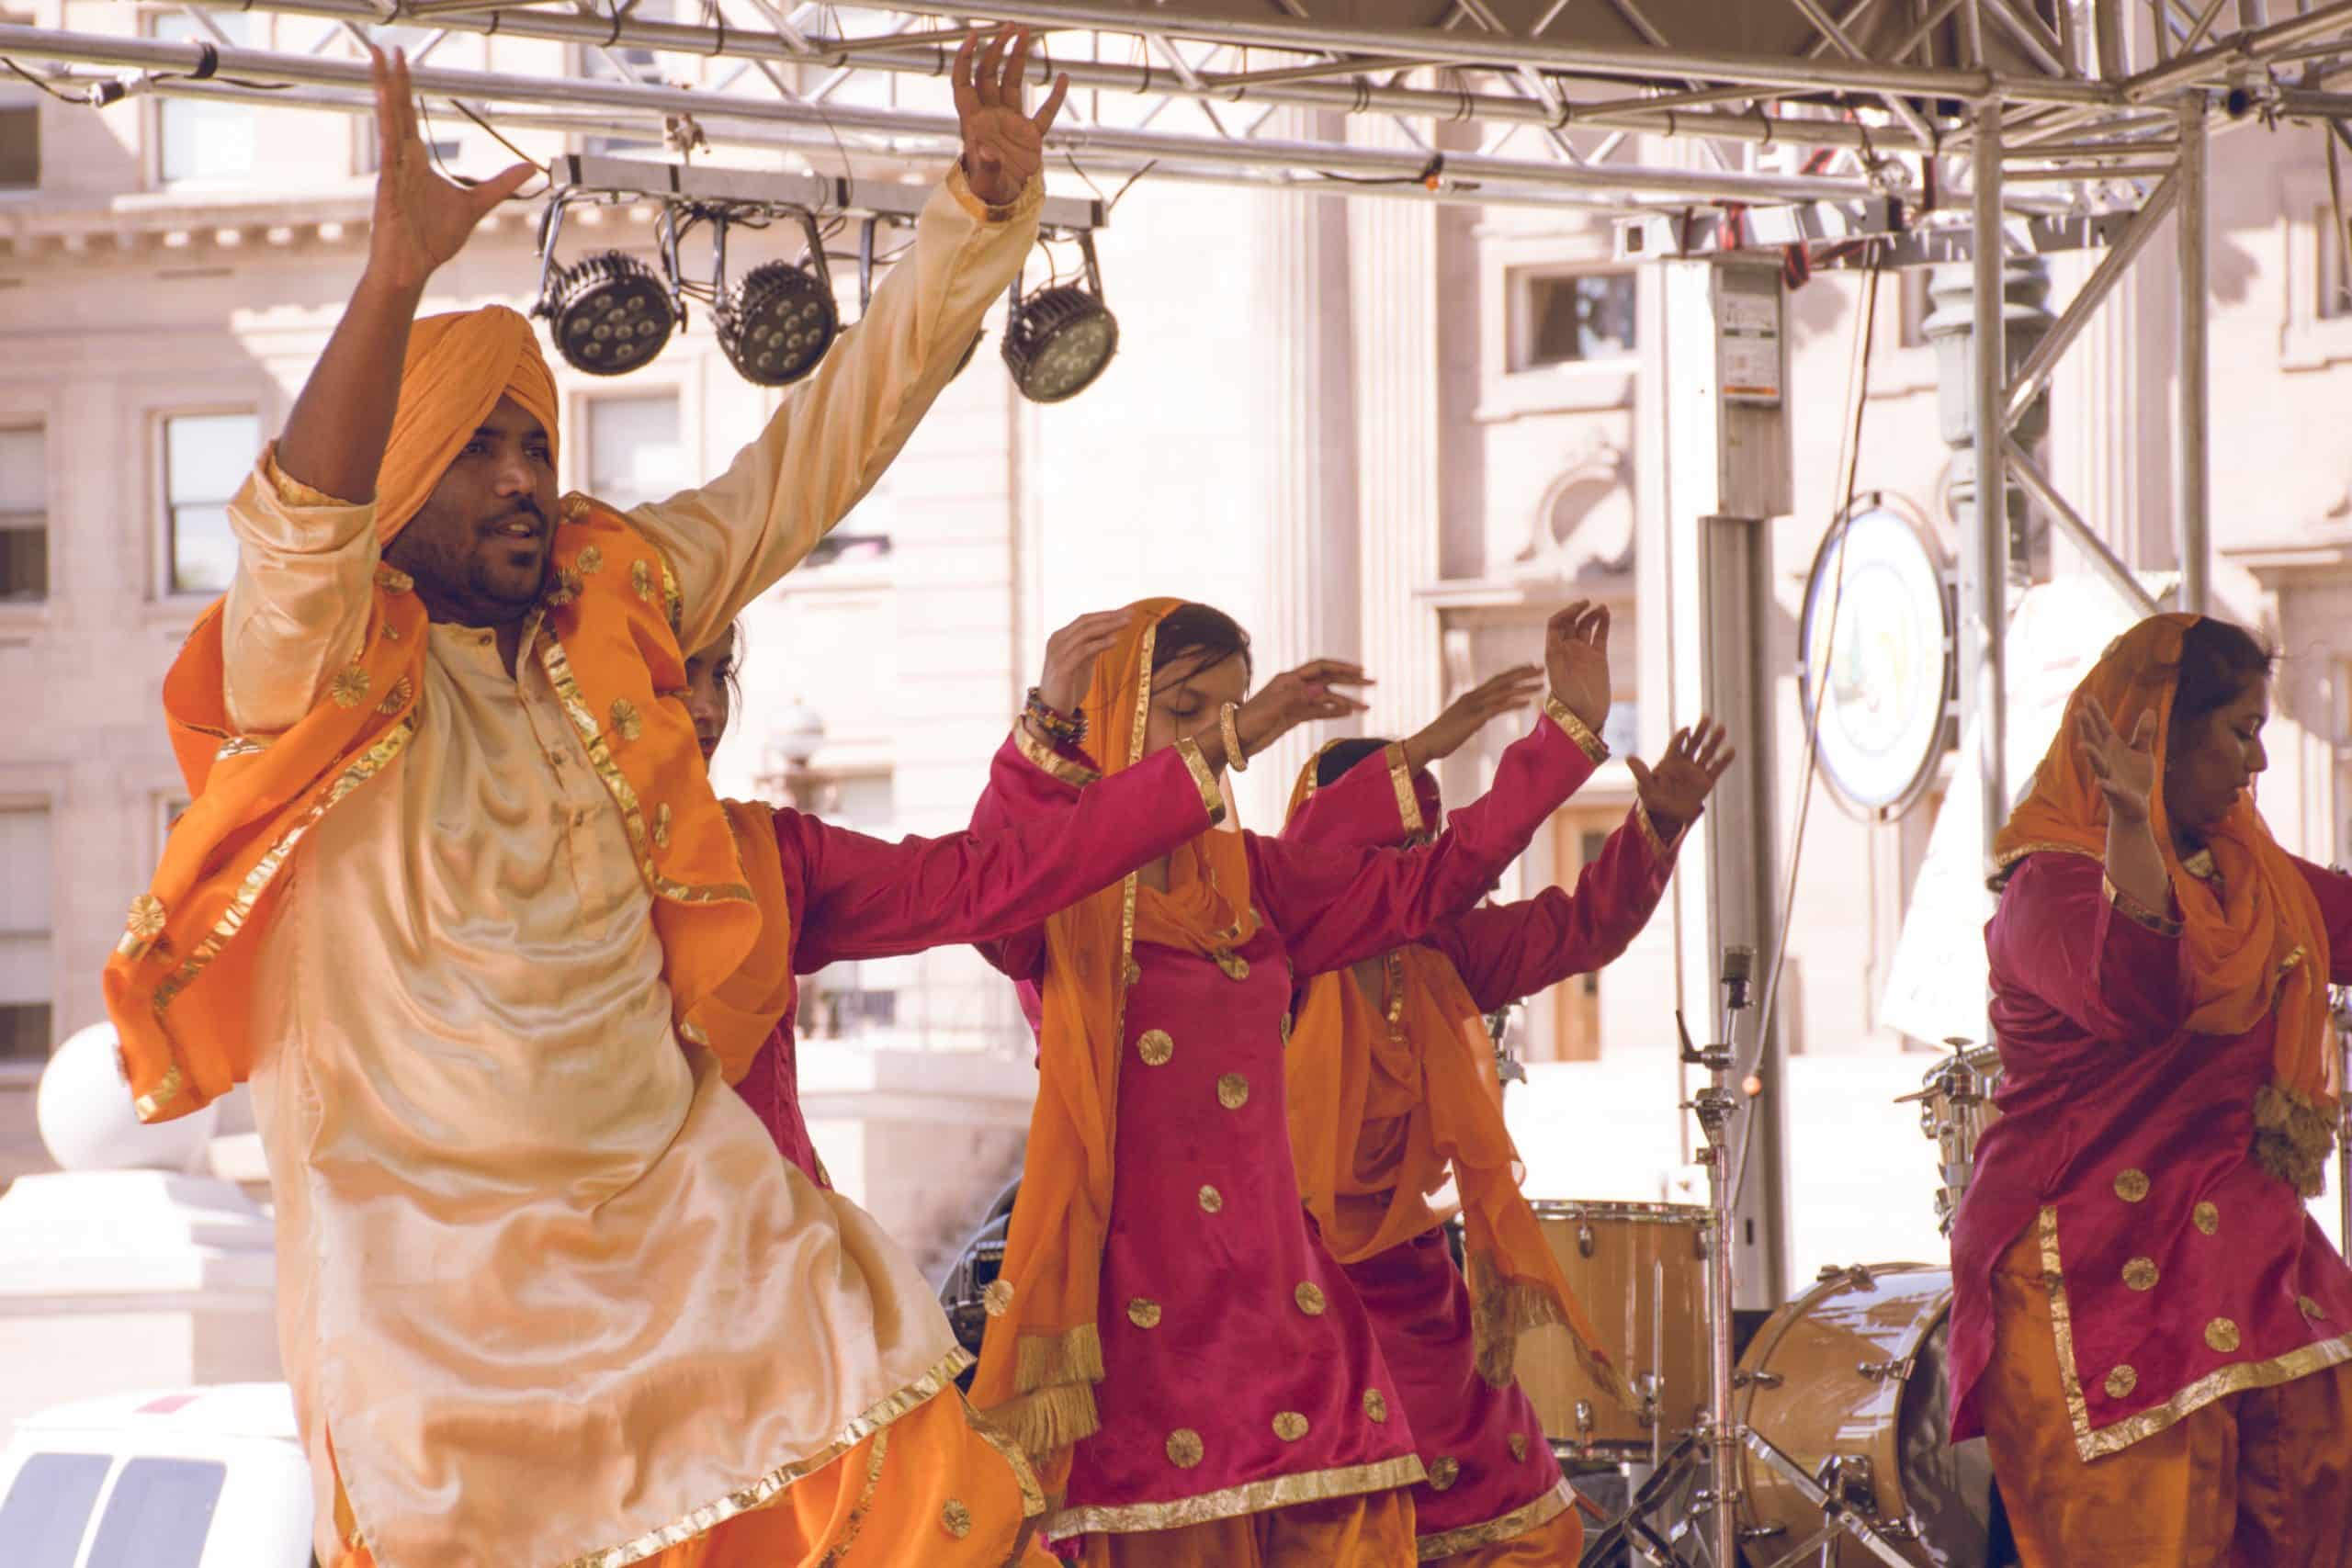 Group of people in traditional Indian clothes performing a dance at an Indian destination wedding.